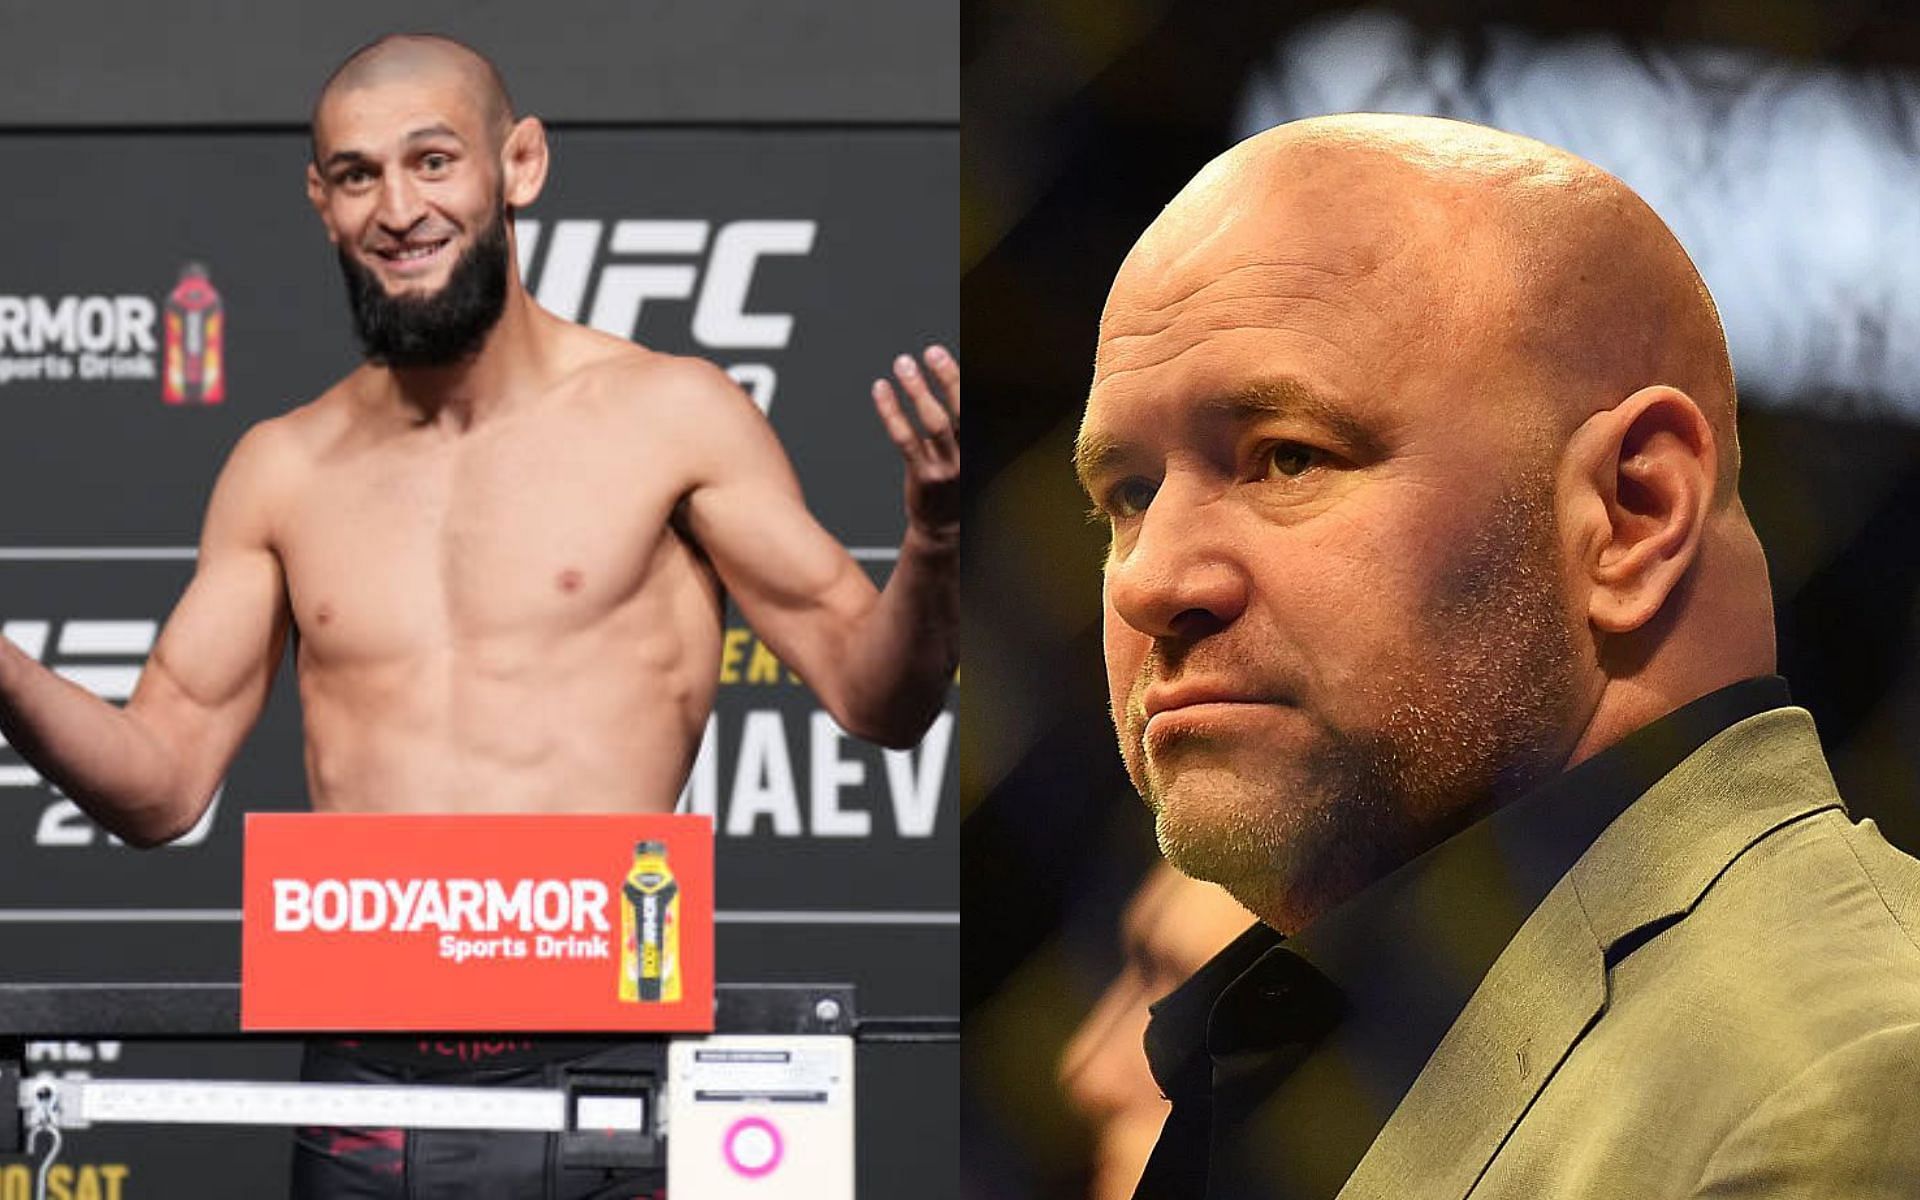 The Fight Show Goes On: UFC, Dana White Pull Off Reshuffled Event